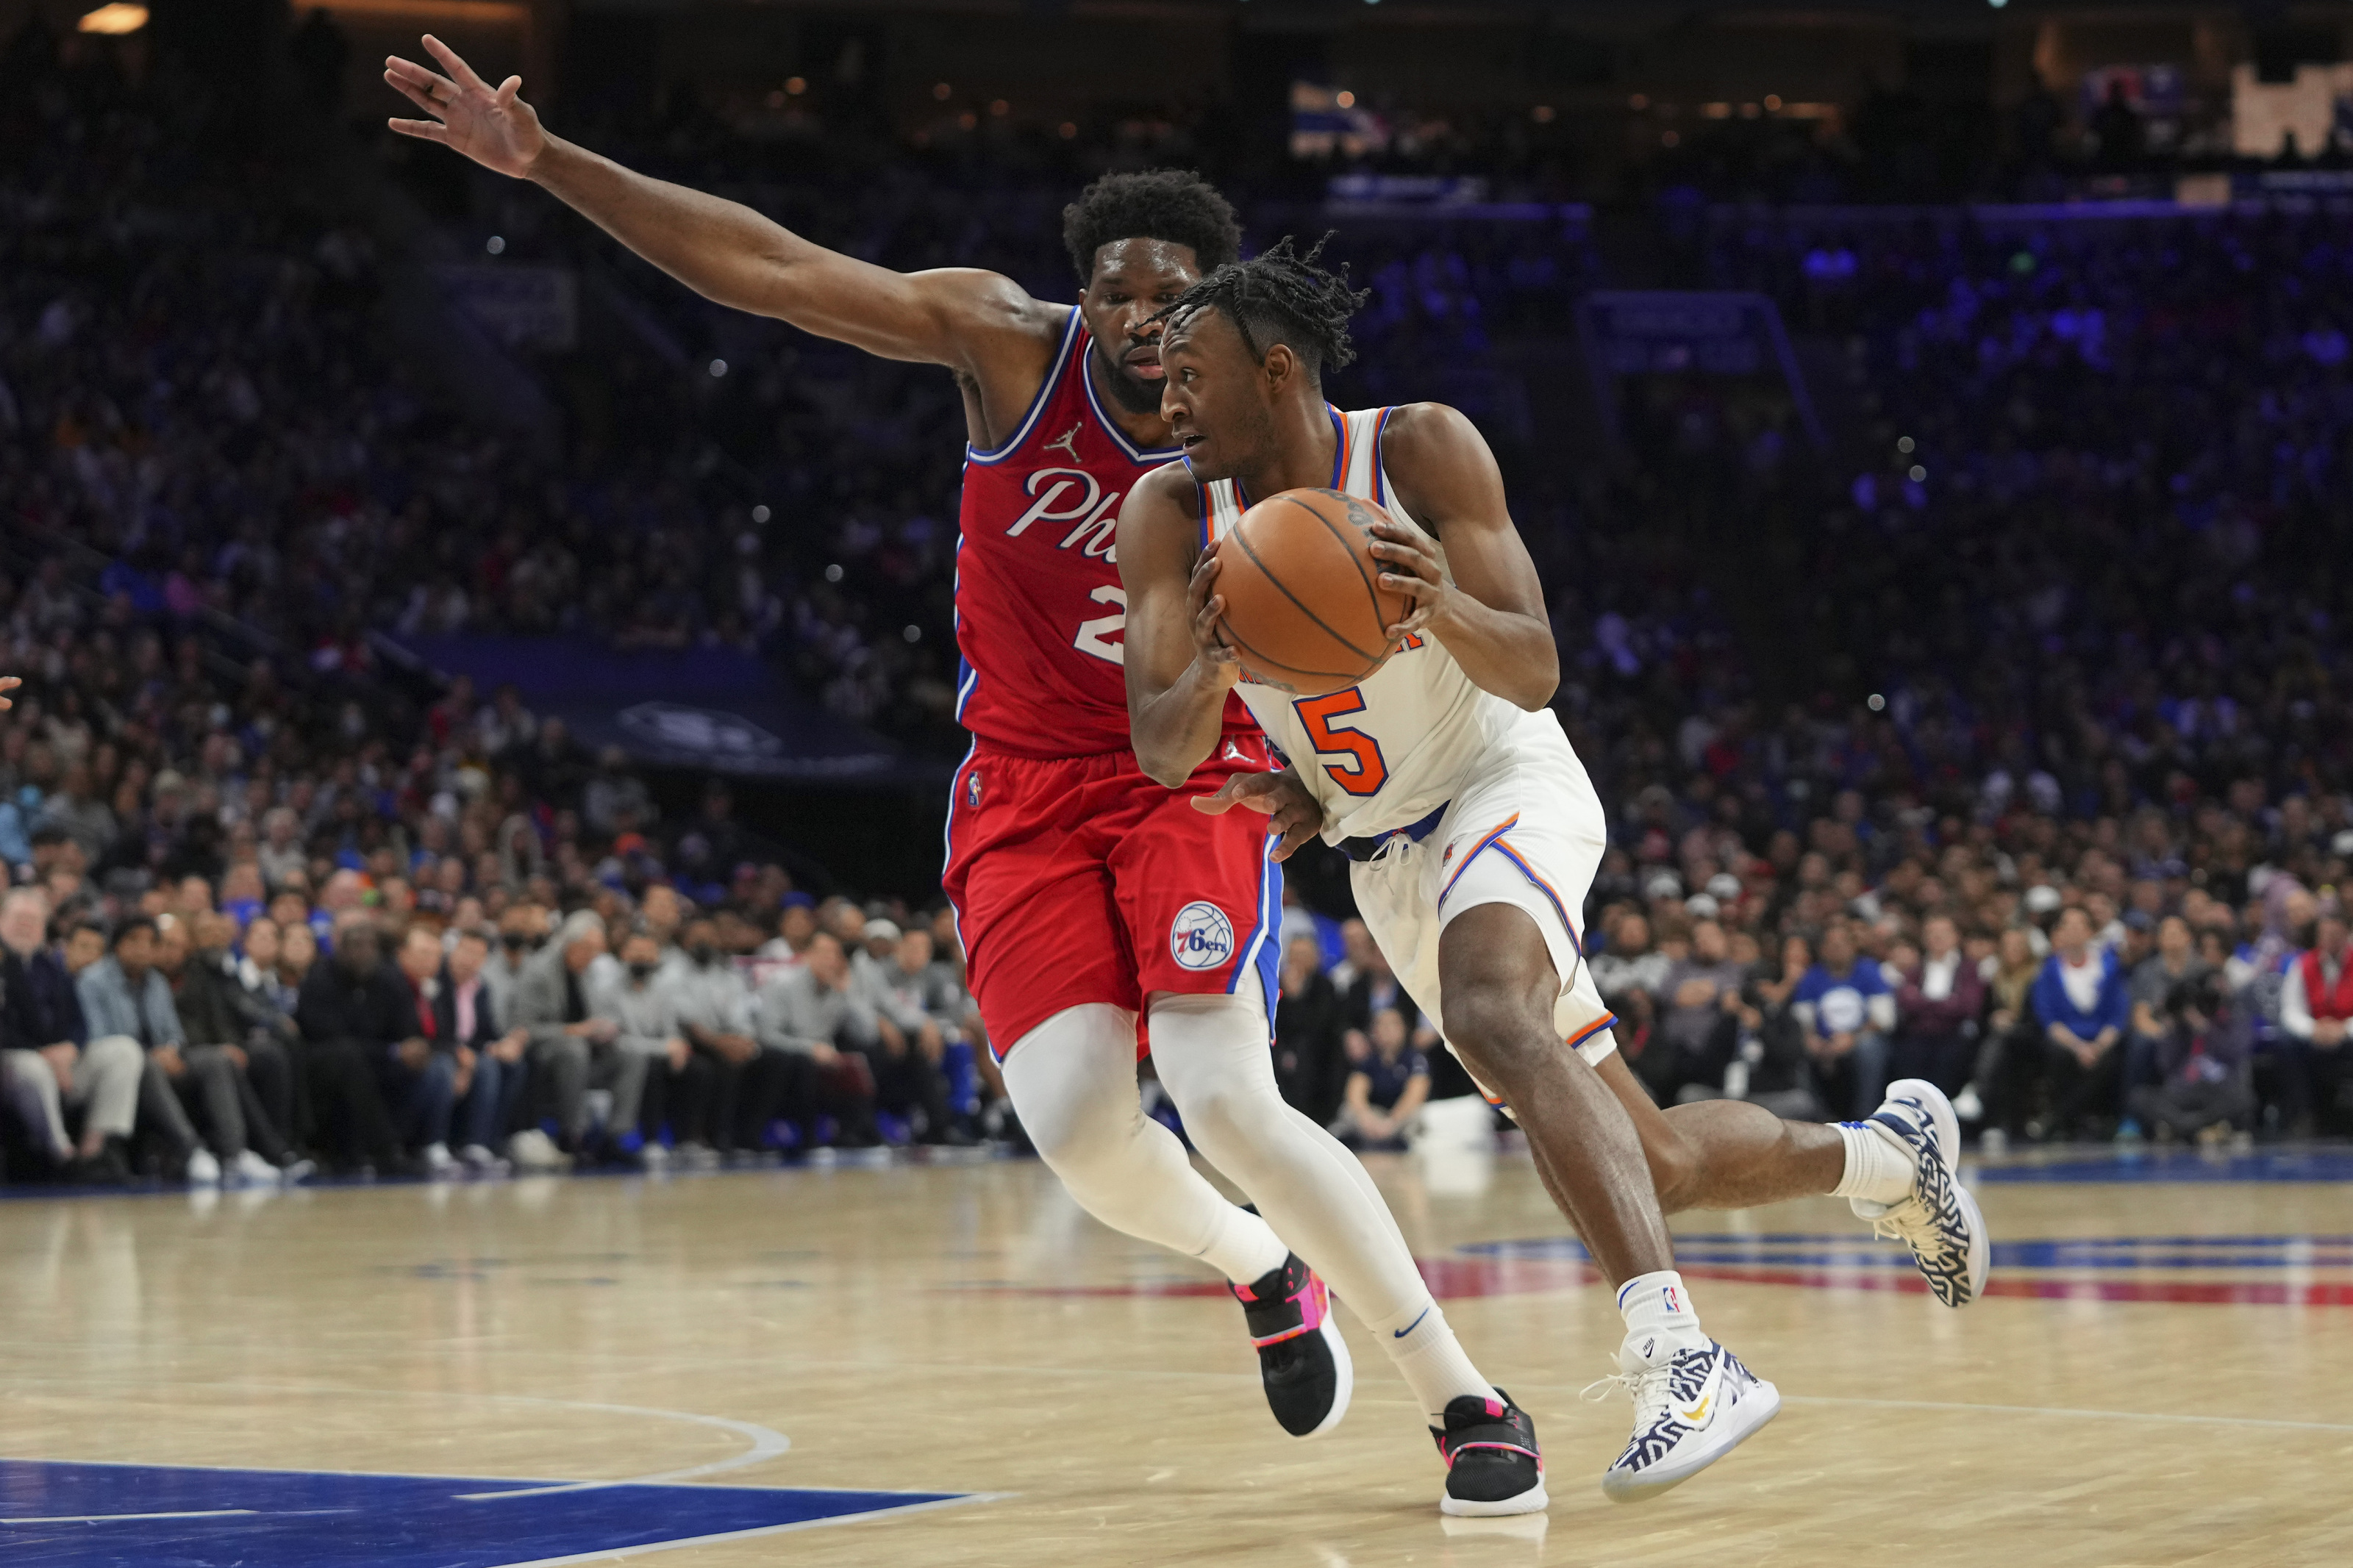 Knicks Game Tonight Knicks vs 76ers Odds, Starting Lineup, Injury Report, Predictions, TV Channel for Nov